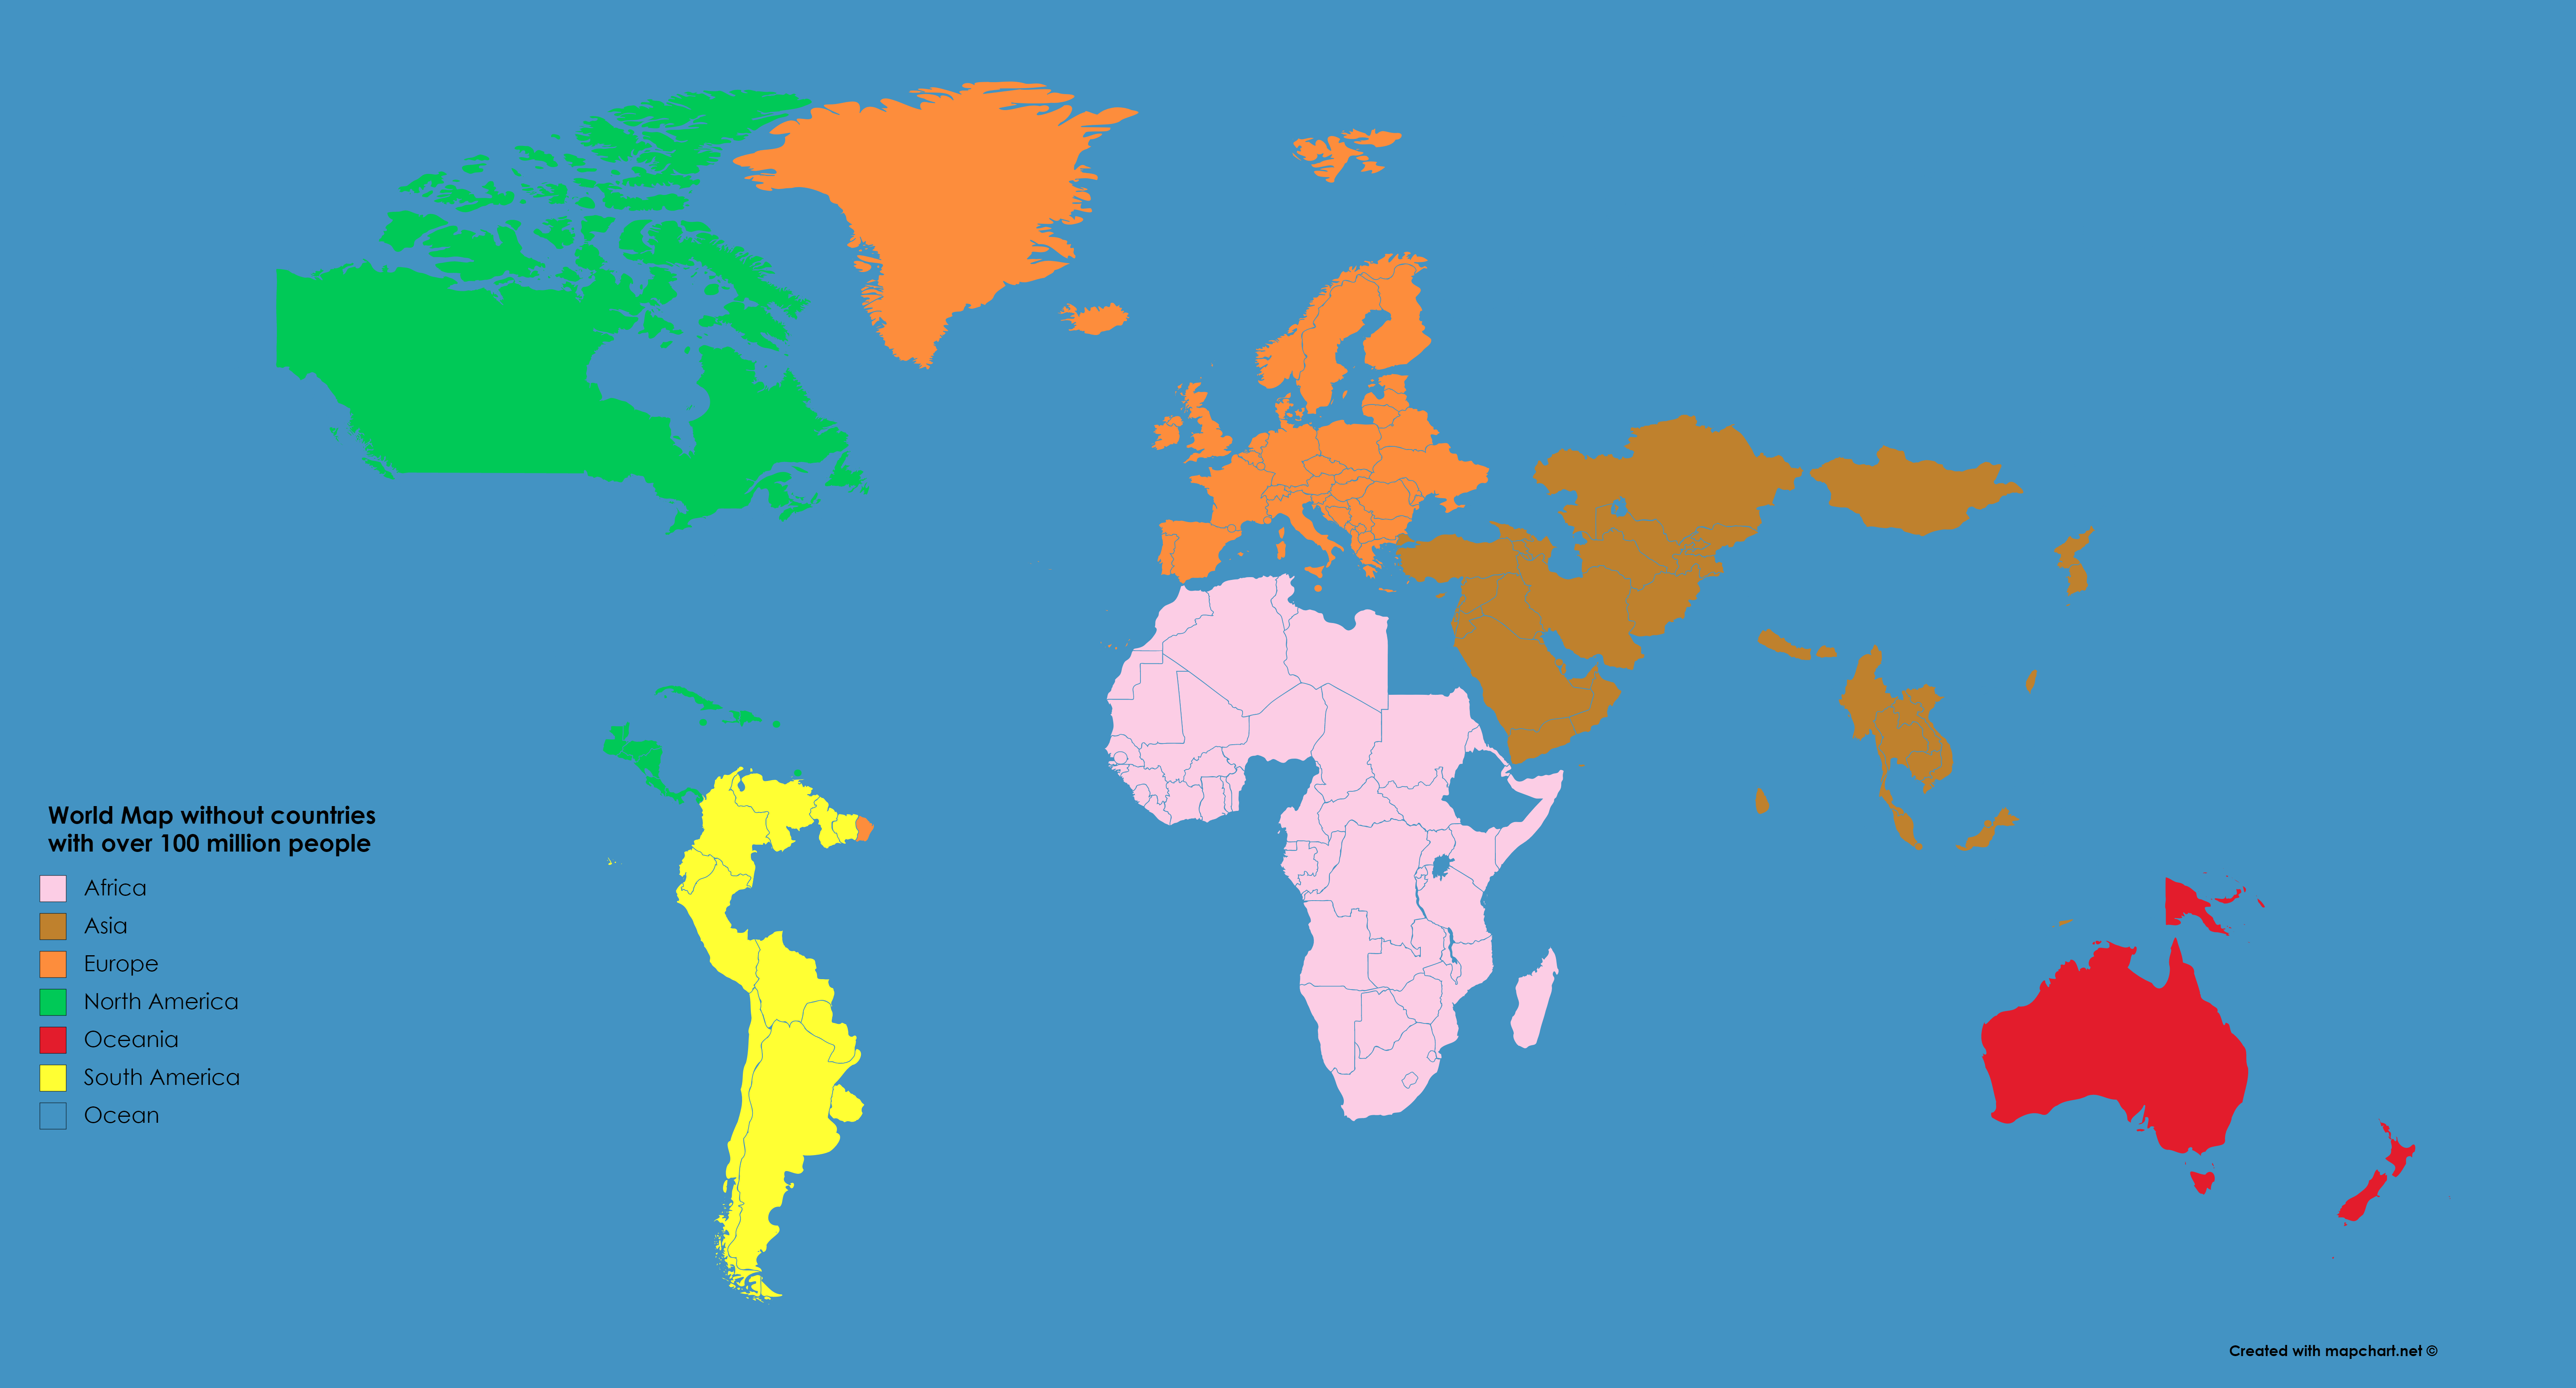 A World Map without countries with over 100 million people